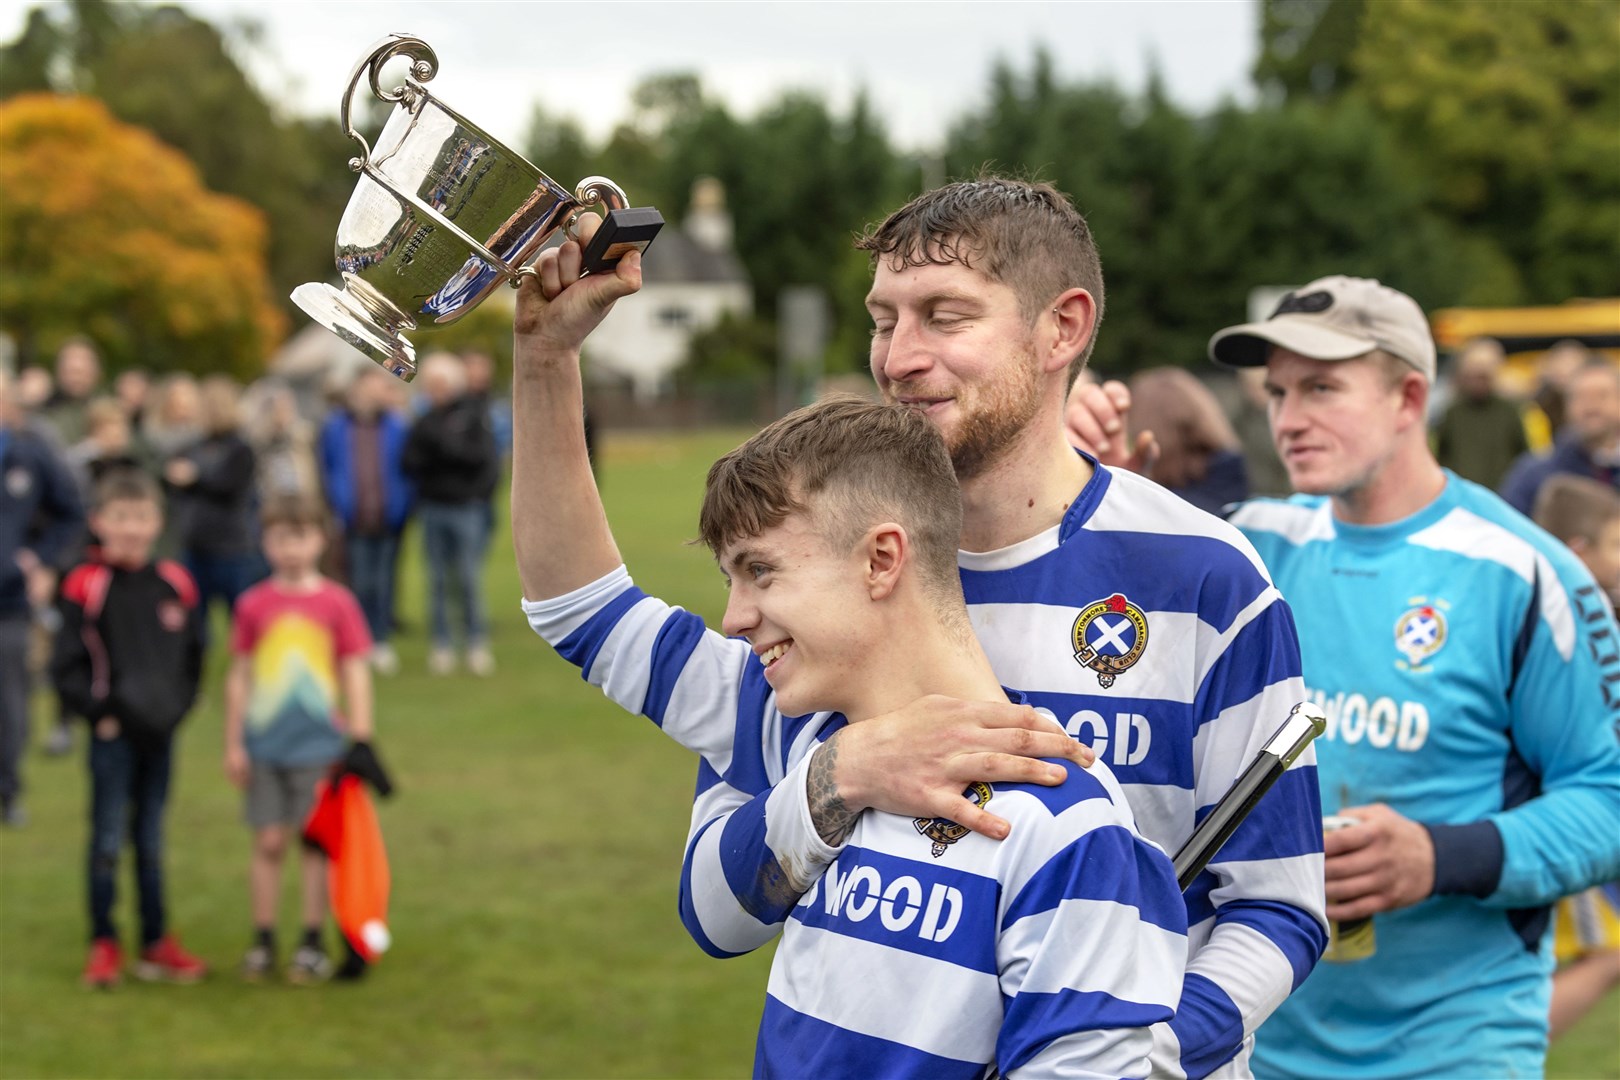 Newtonmore captain Sorley Thomson goes to share the trophy with his team.